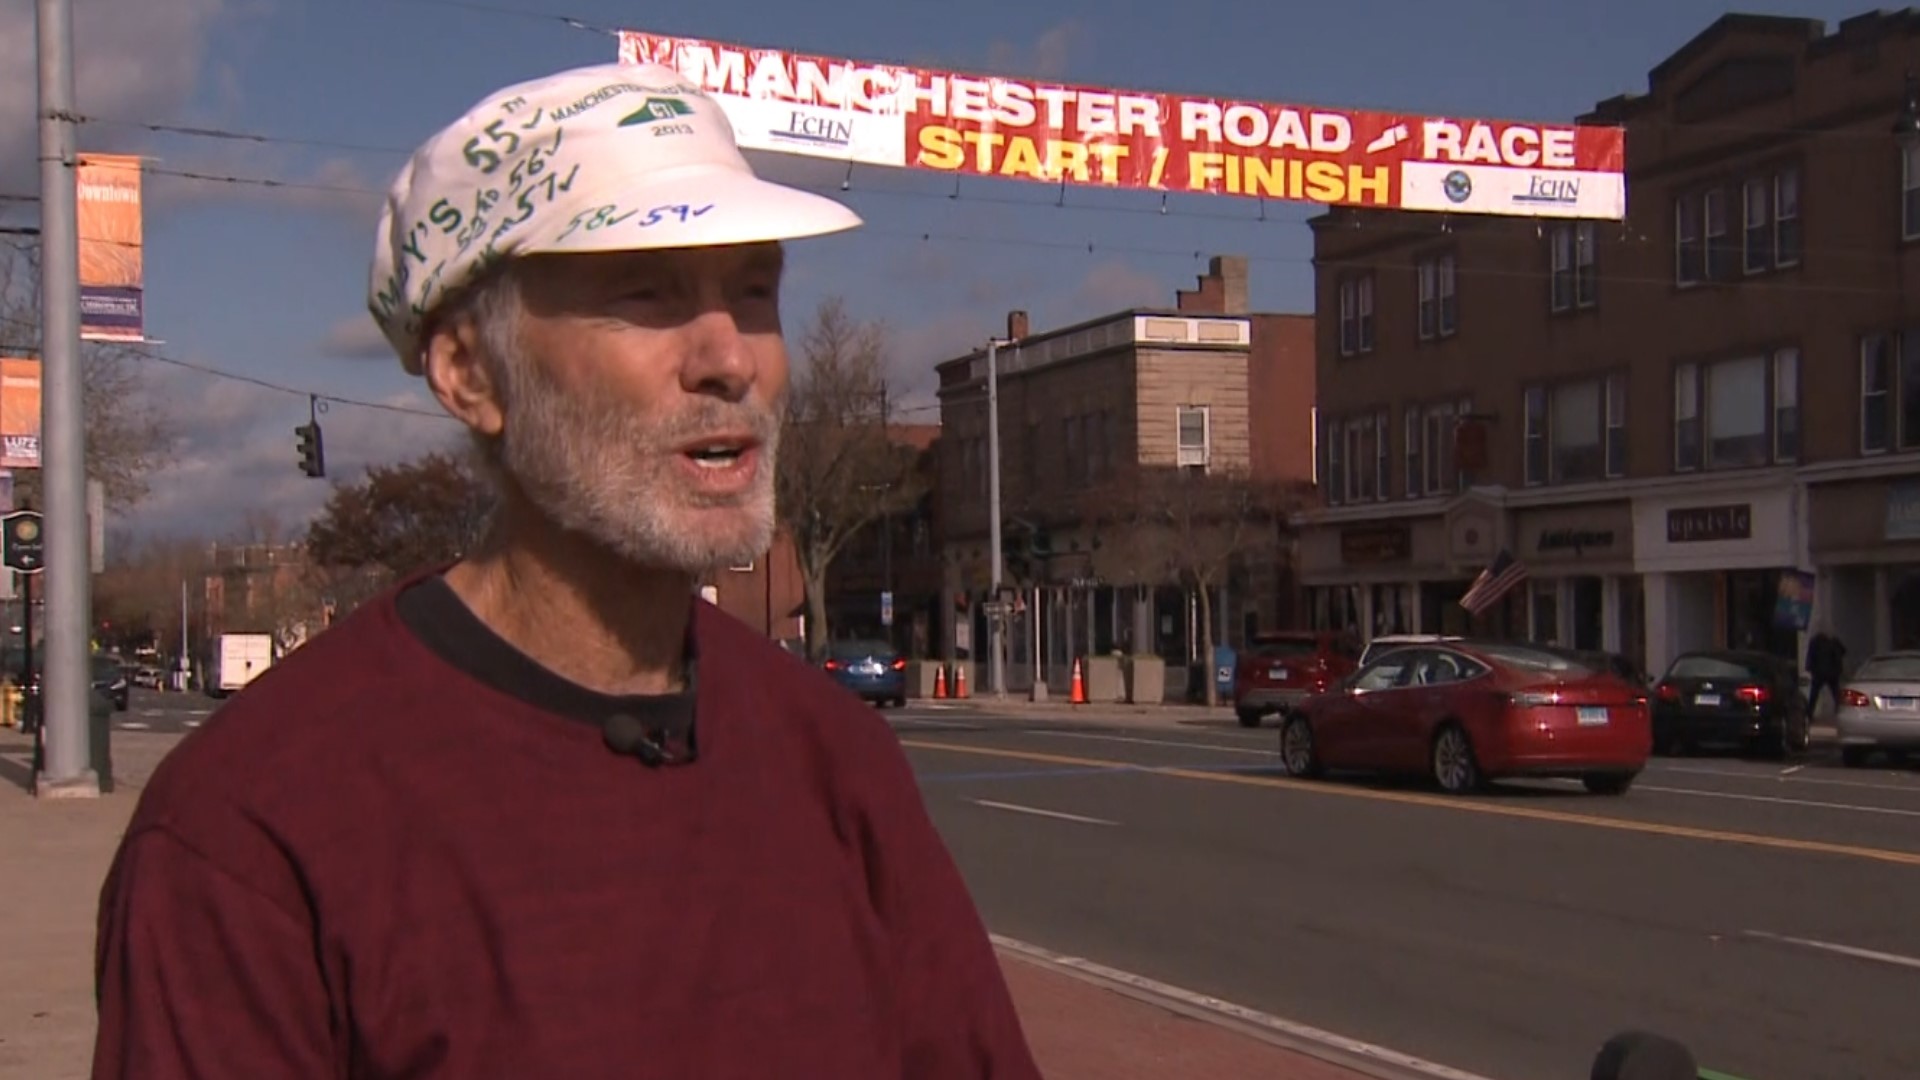 The nine-time Manchester Road Race champion is set to run the race for a record 60th time, all in a row.